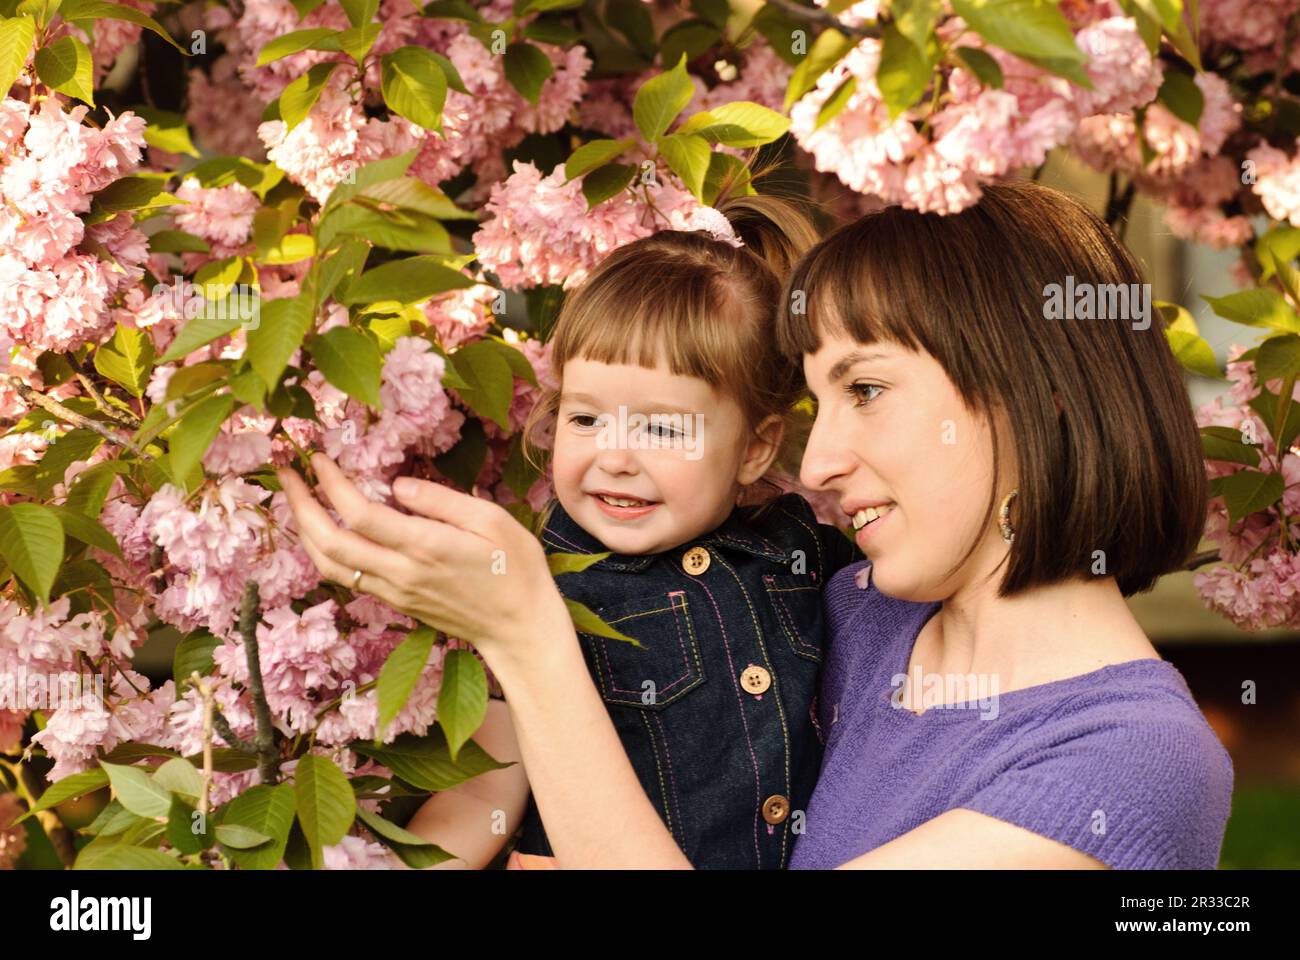 Mother and daughter in garden Stock Photo